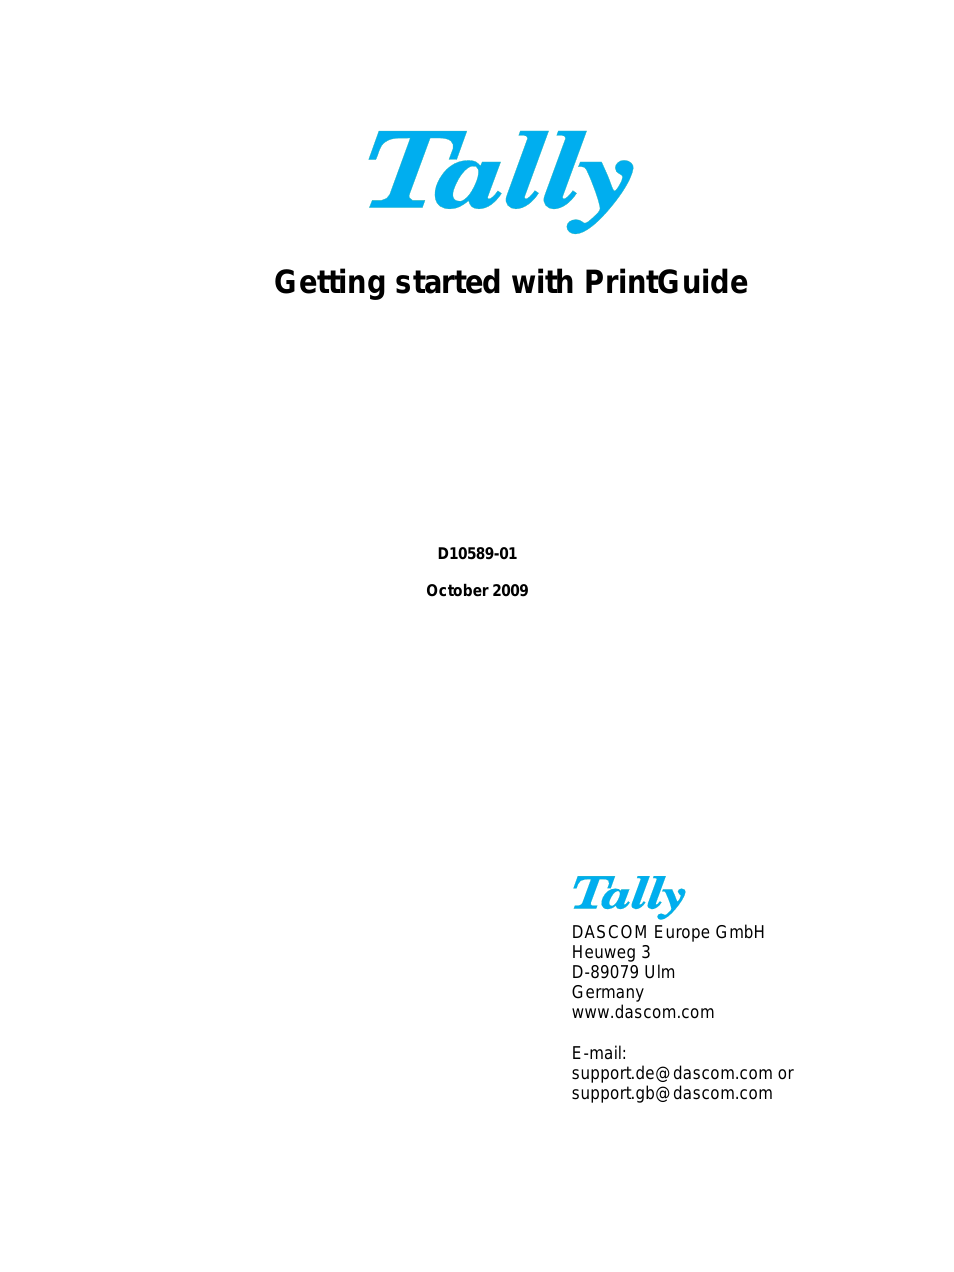 TallyCom III Getting started with PrintGuide